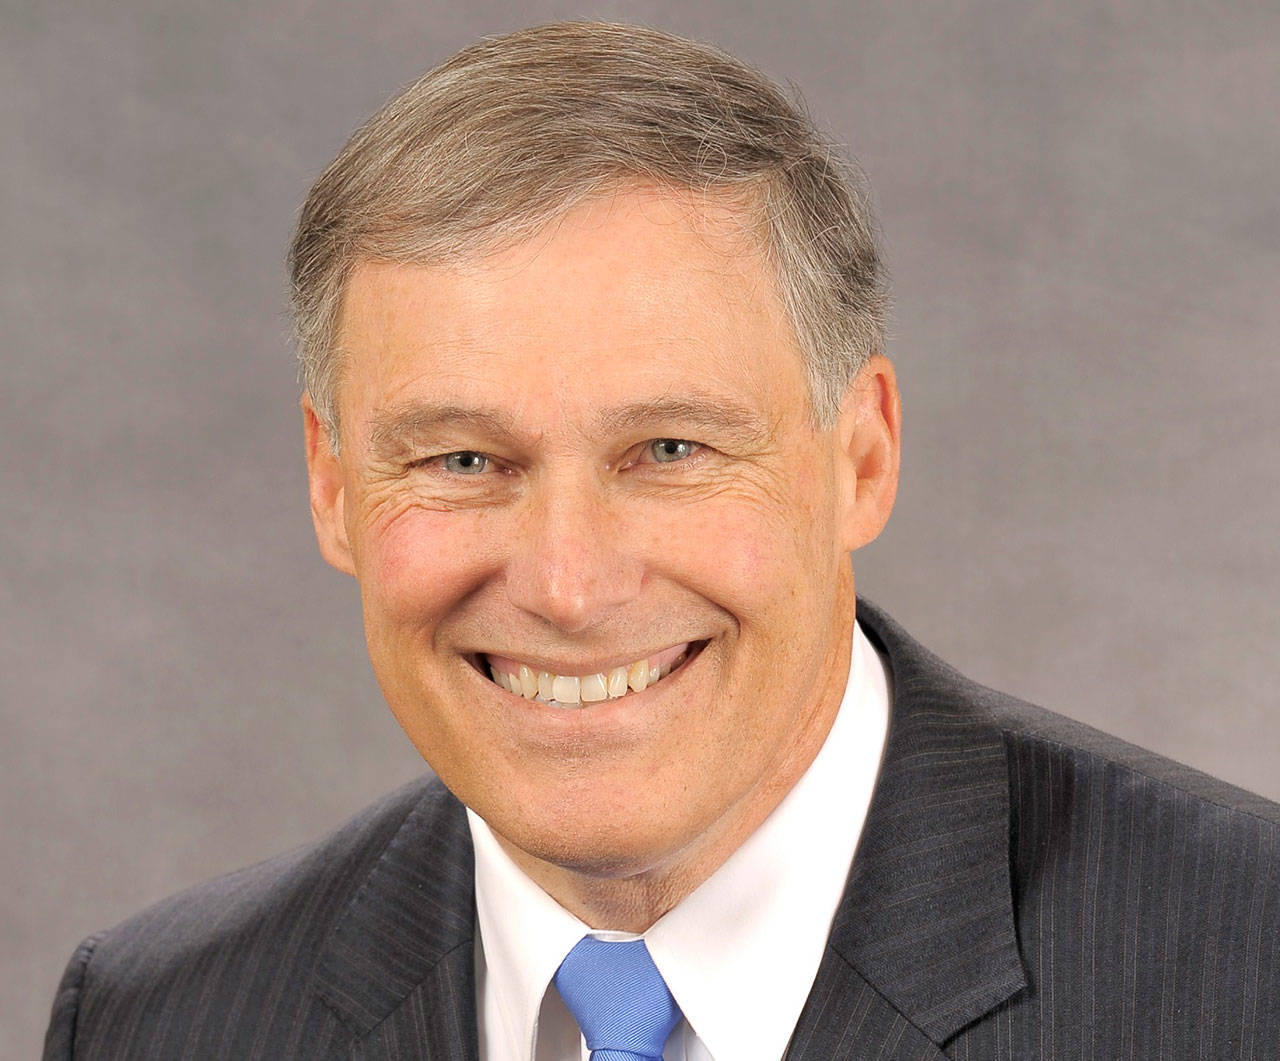 Inslee launches 2020 presidential campaign